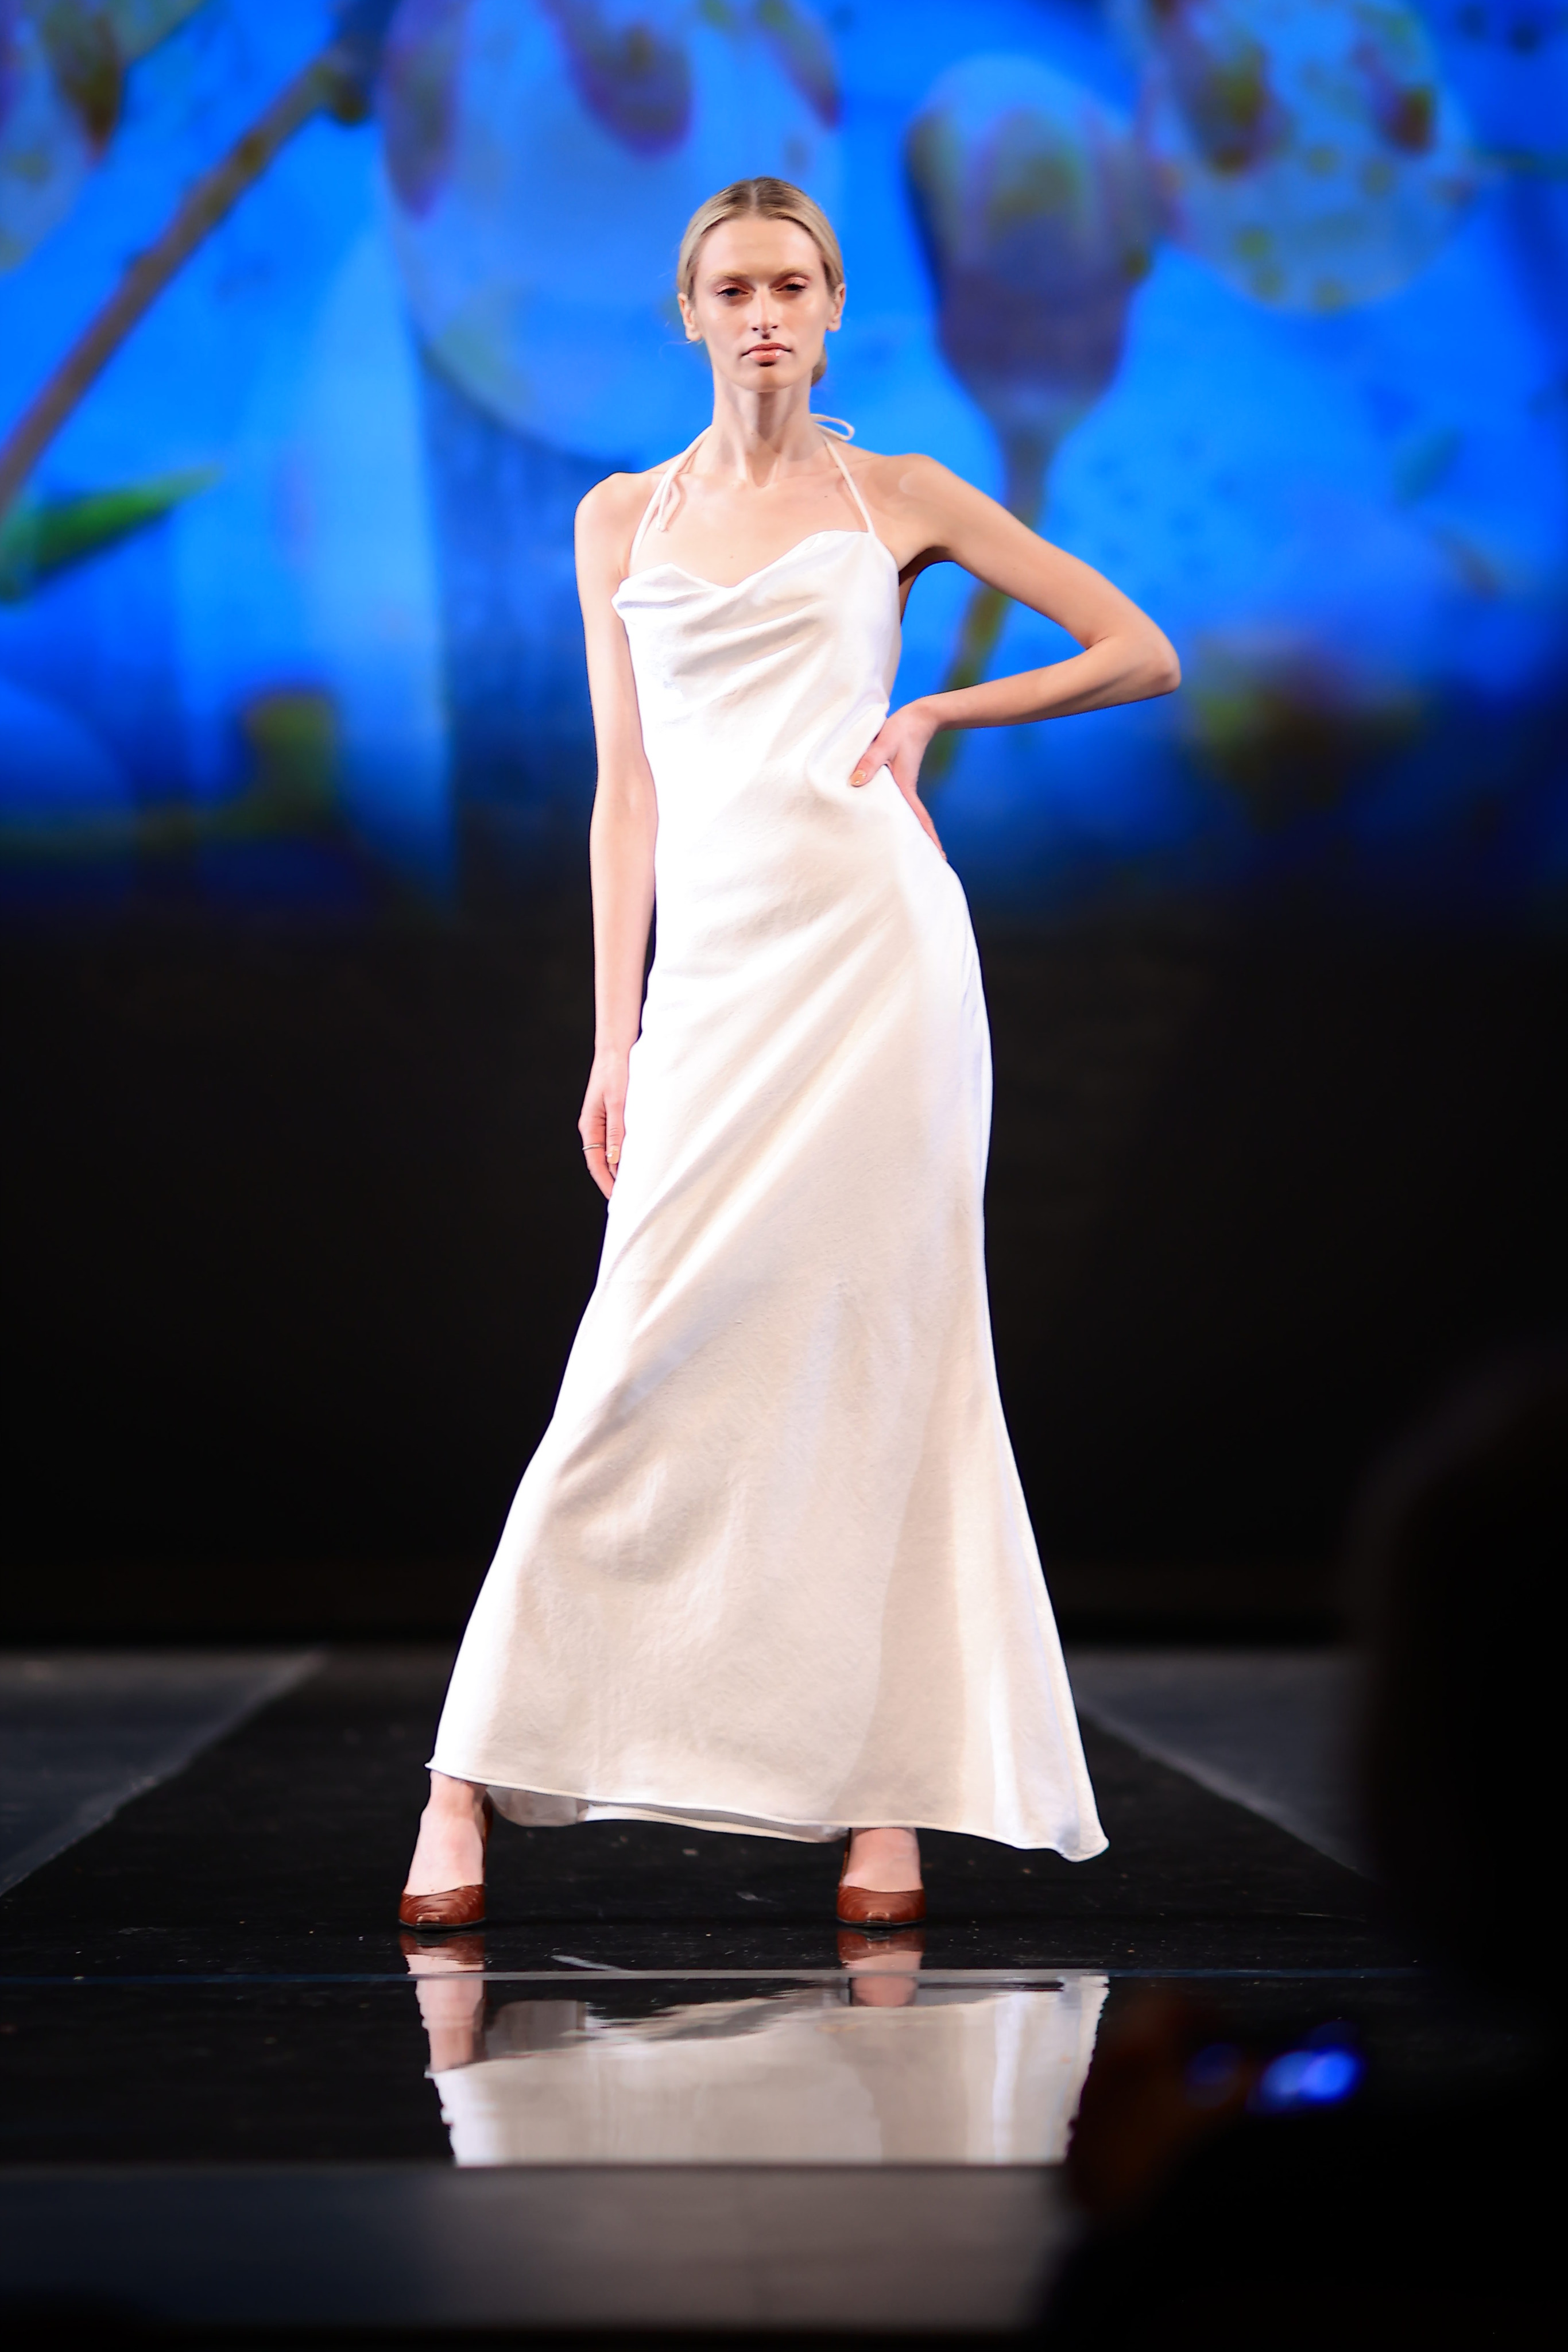 Model wearing a long white dress and brown heels with their hair up in a low bun.